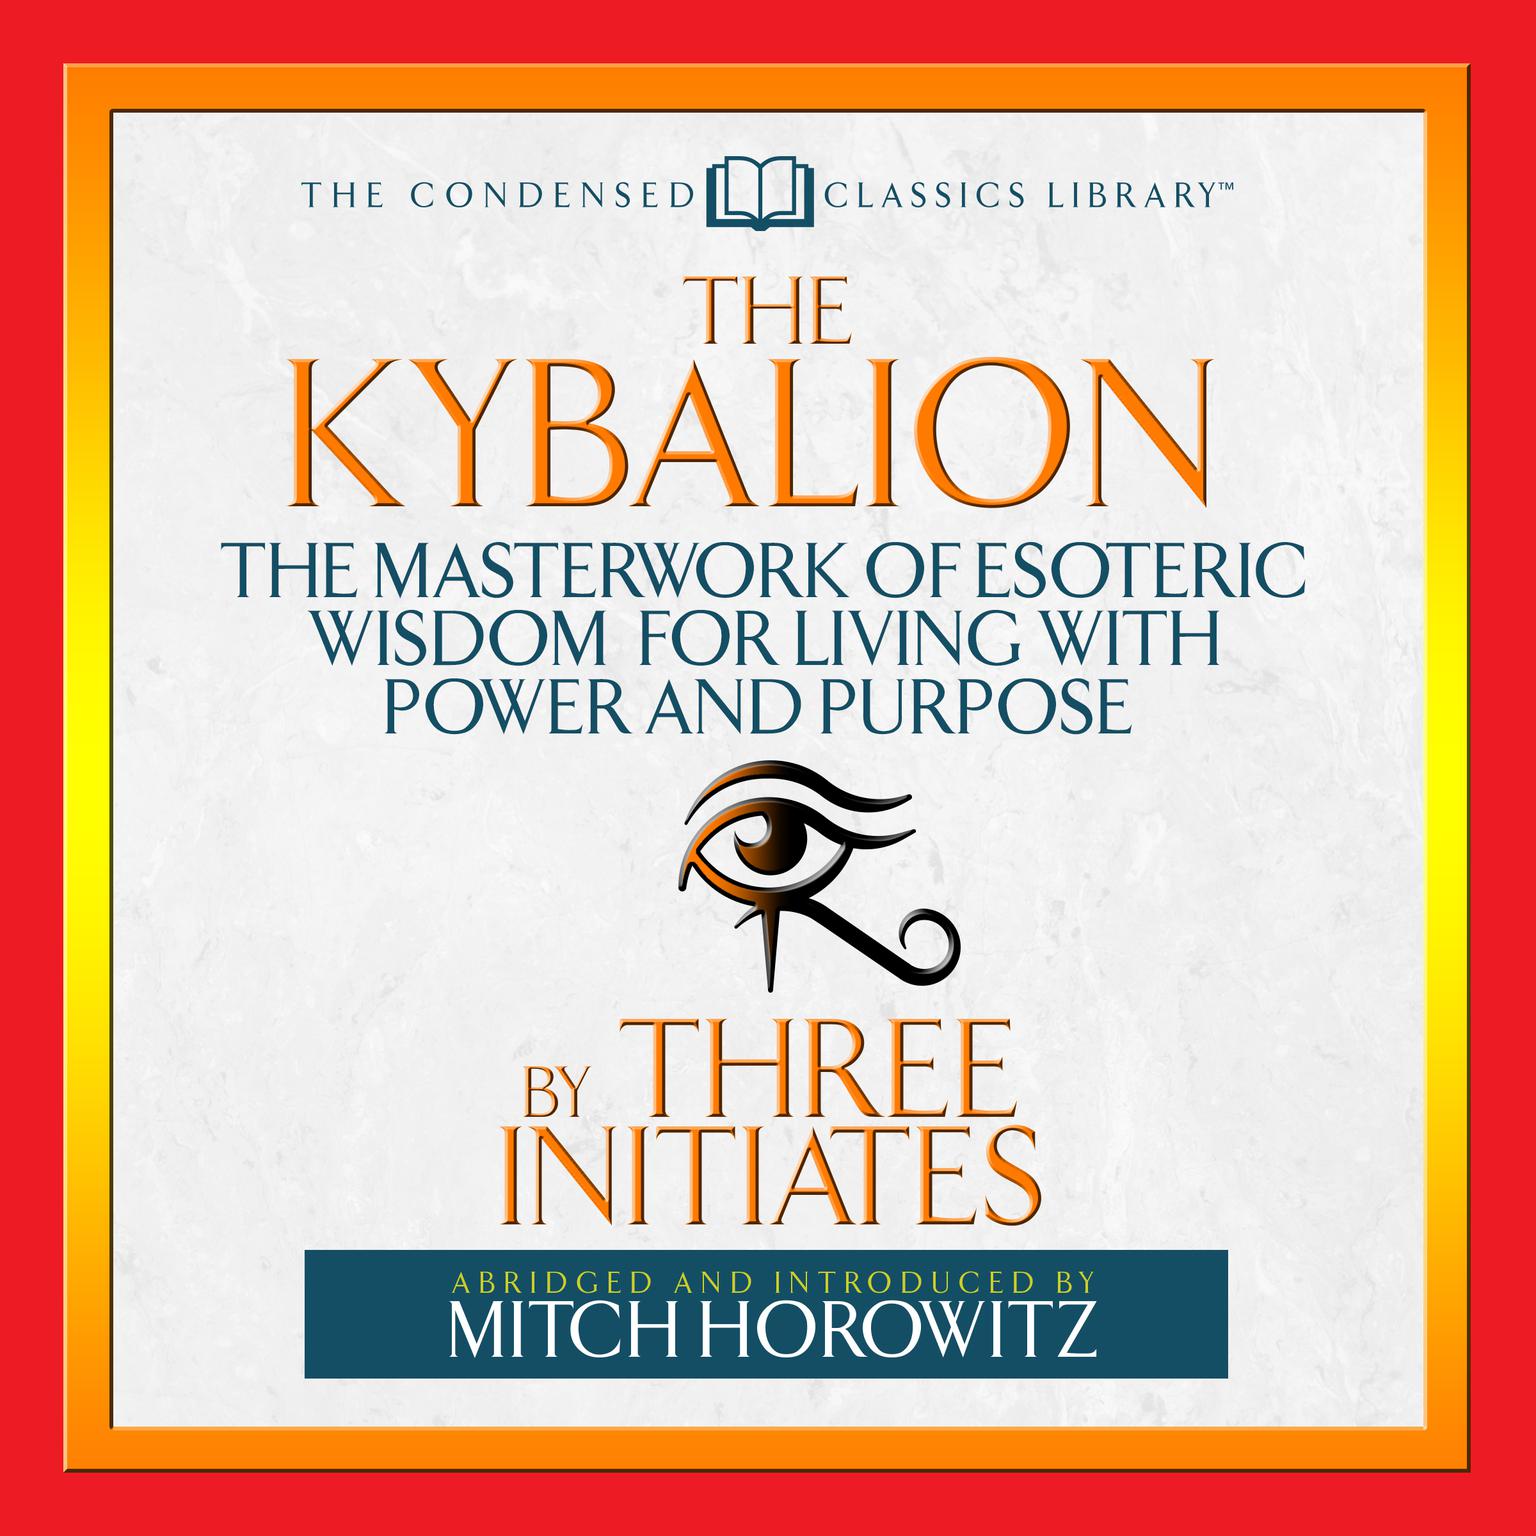 The Kybalion (Abridged): The Masterwork of Esoteric Wisdom for Living With Power and Purpose Audiobook, by The Three Initiates